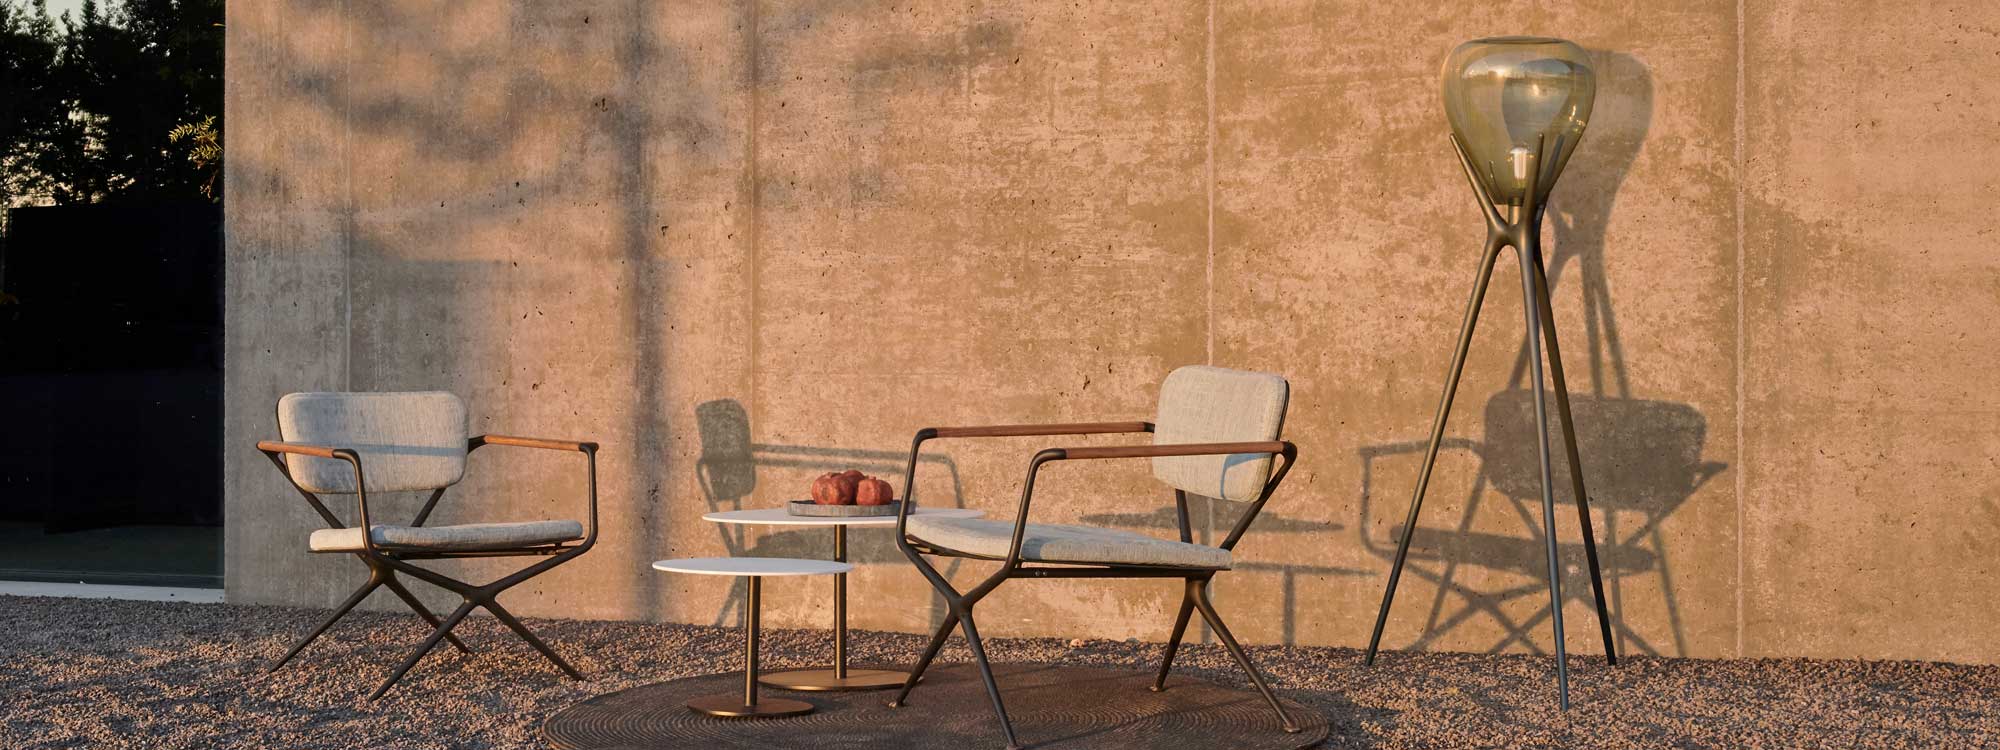 Image of Meduz Modern Outdoor Floor Lamp with Exes lounge chairs and Butler side tables